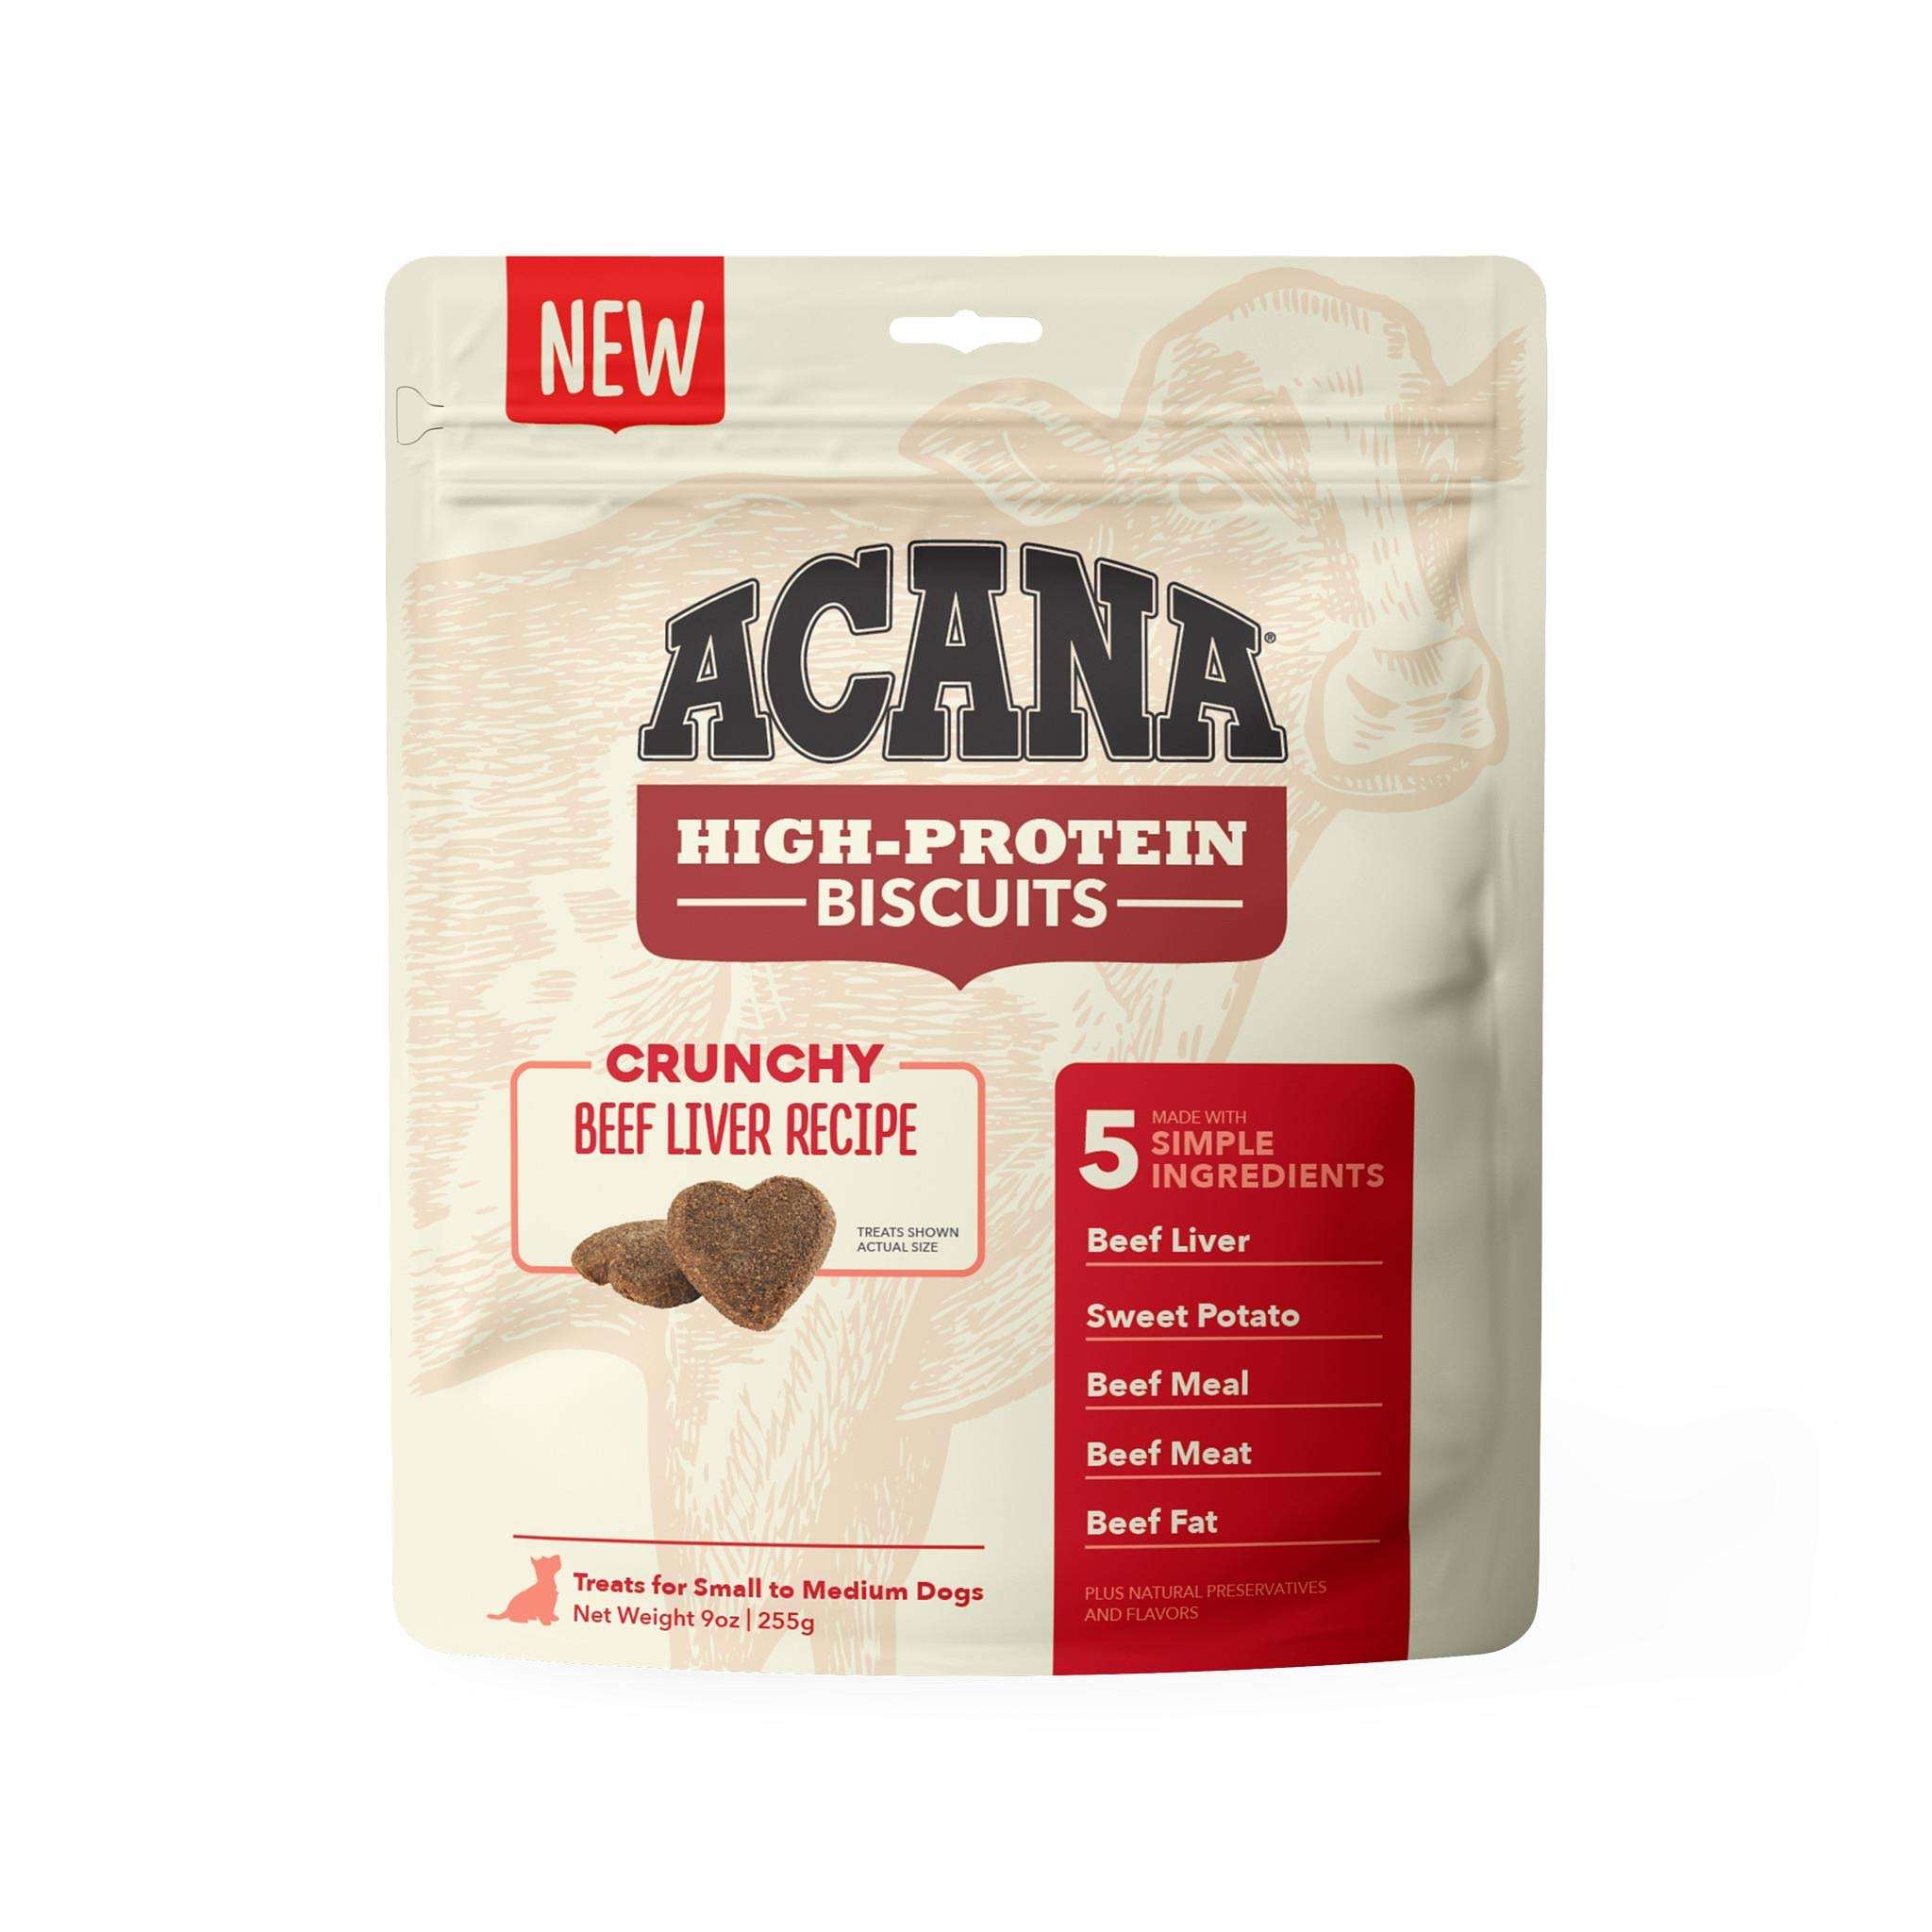 ACANA High Protein Biscuits 9oz Dog Treats Beef Liver / Small